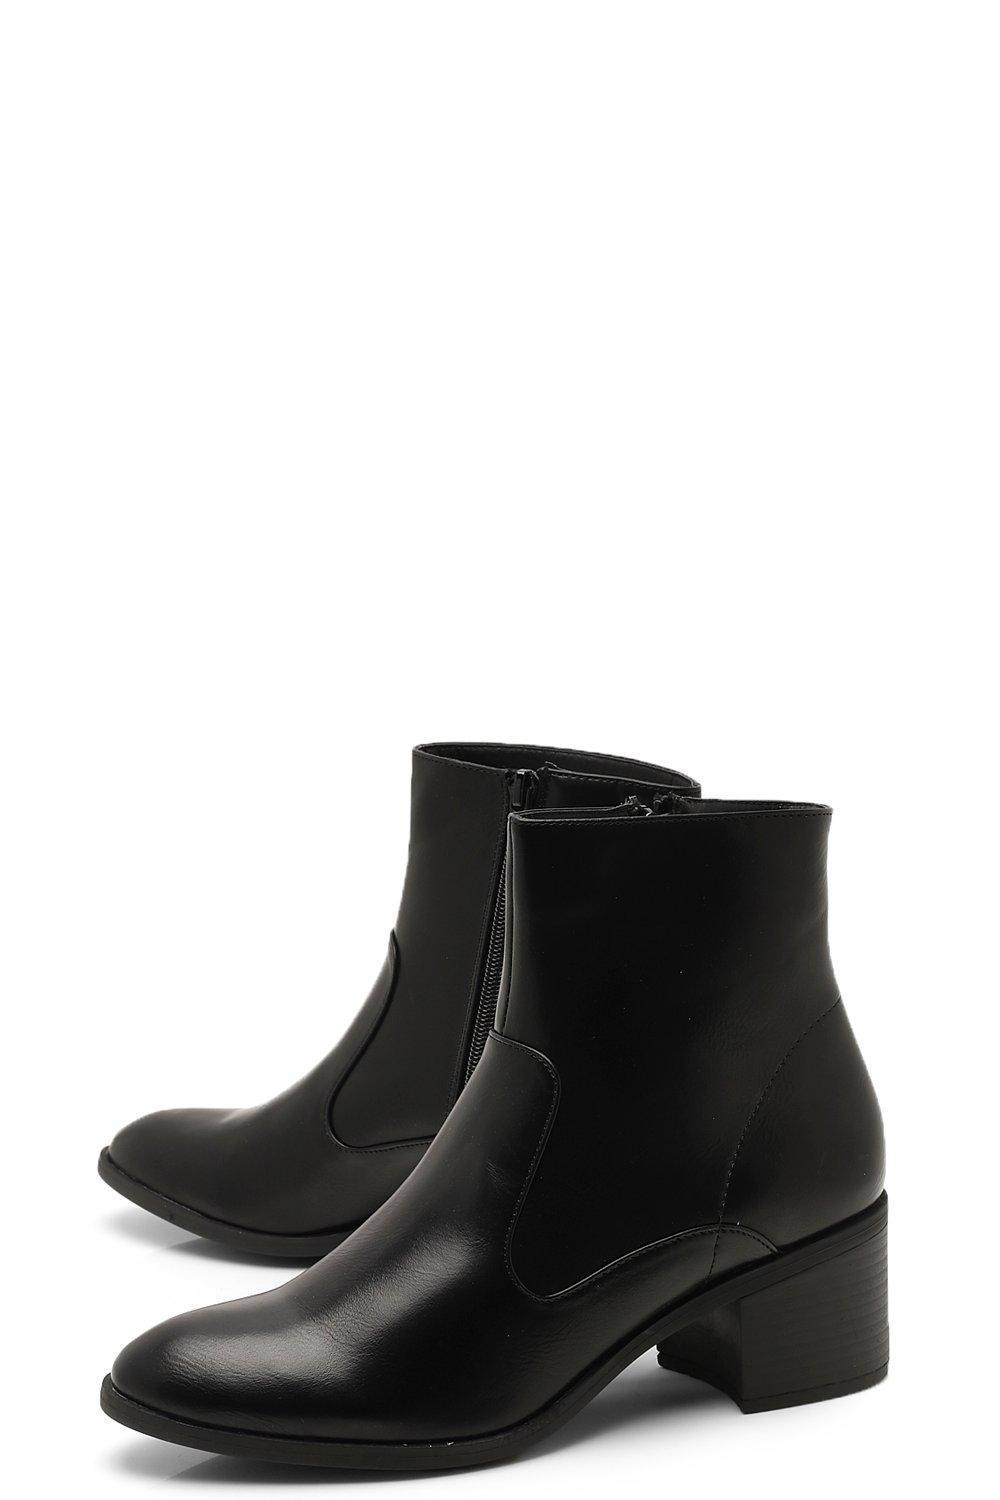 black boots with little heel